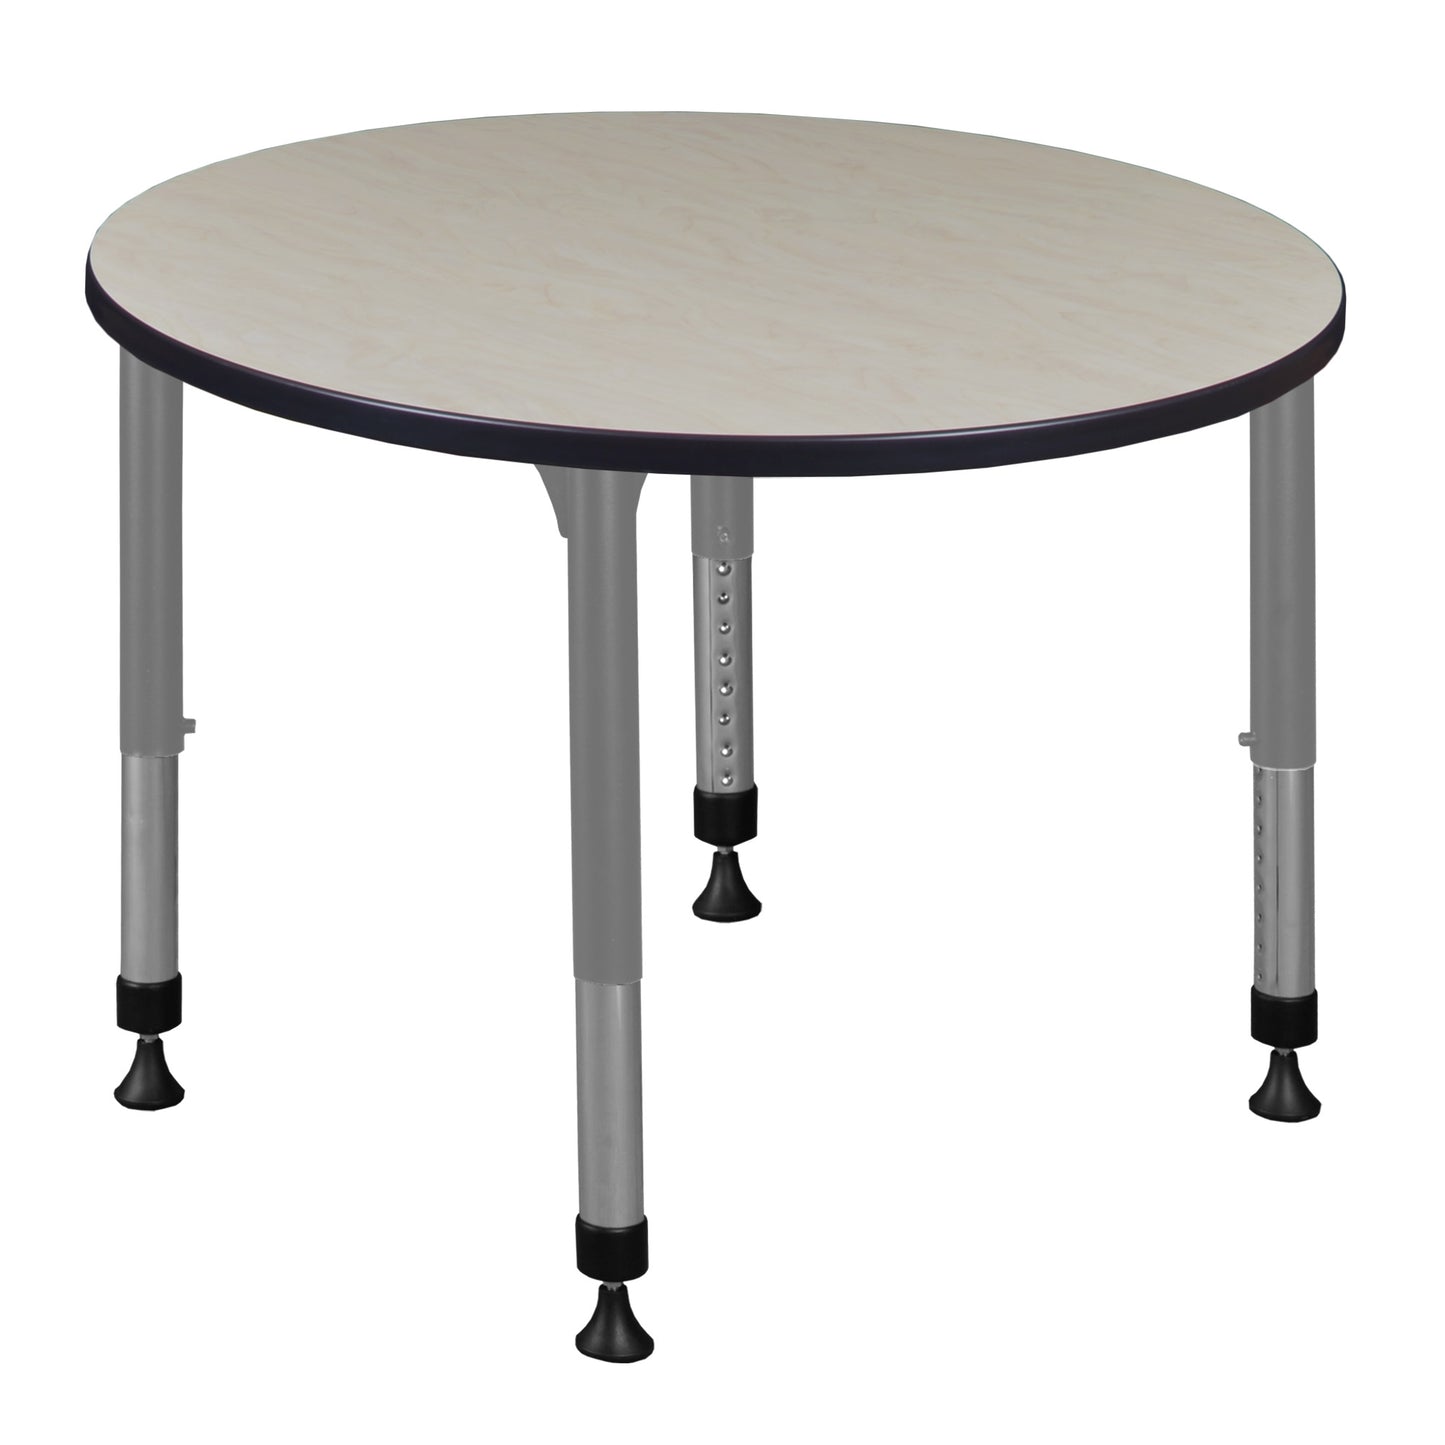 Regency Kee 42 in. Round Height Adjustable Mobile Classroom Activity Table